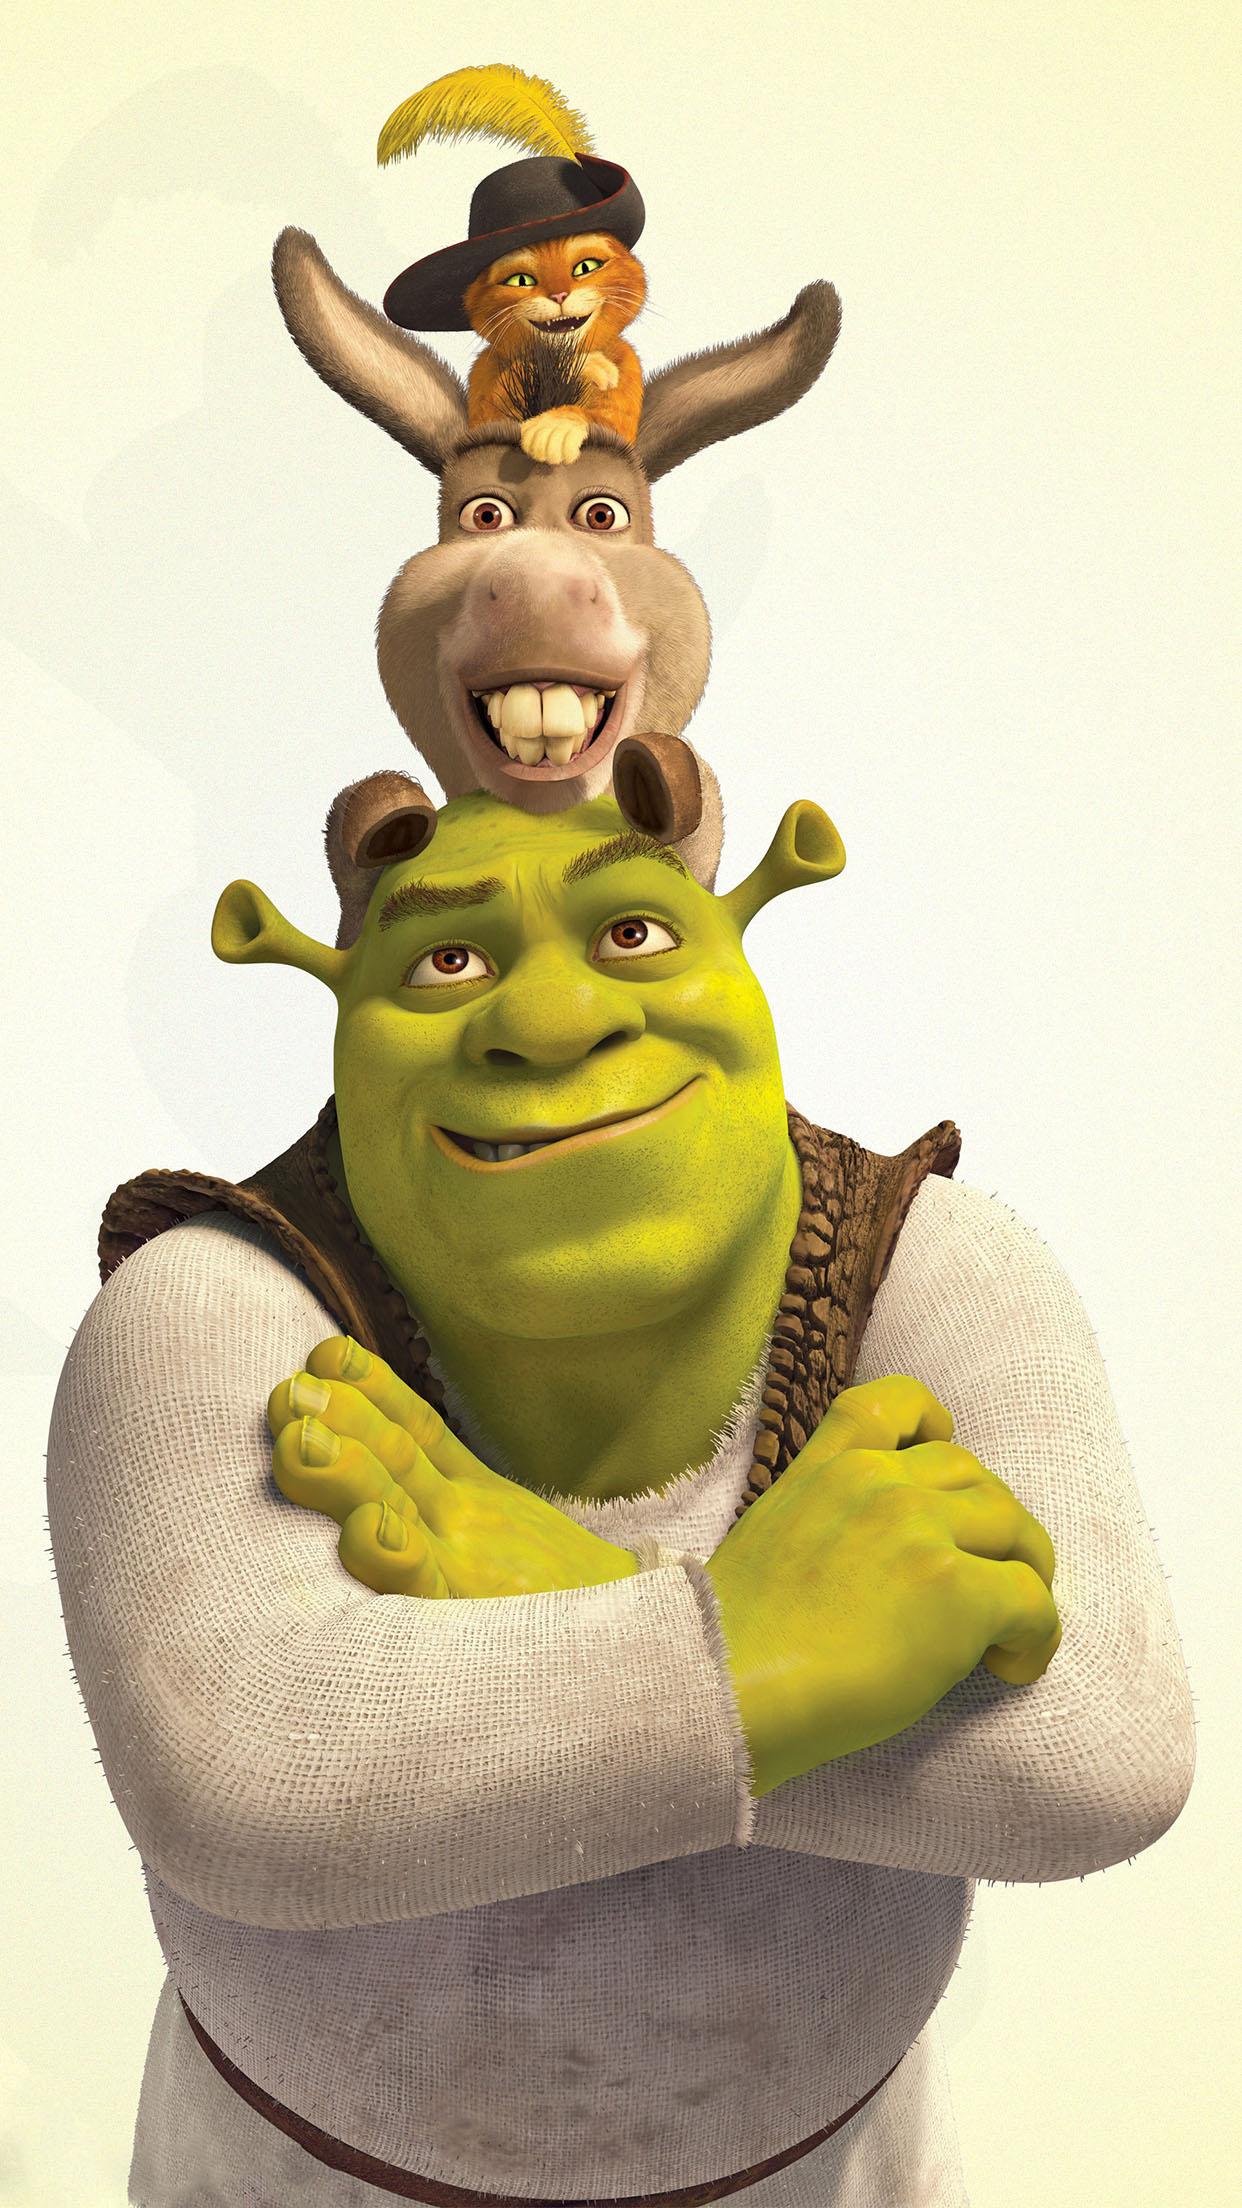 Shrek donkey and puss in boots Wallpaper for iPhone X, 6